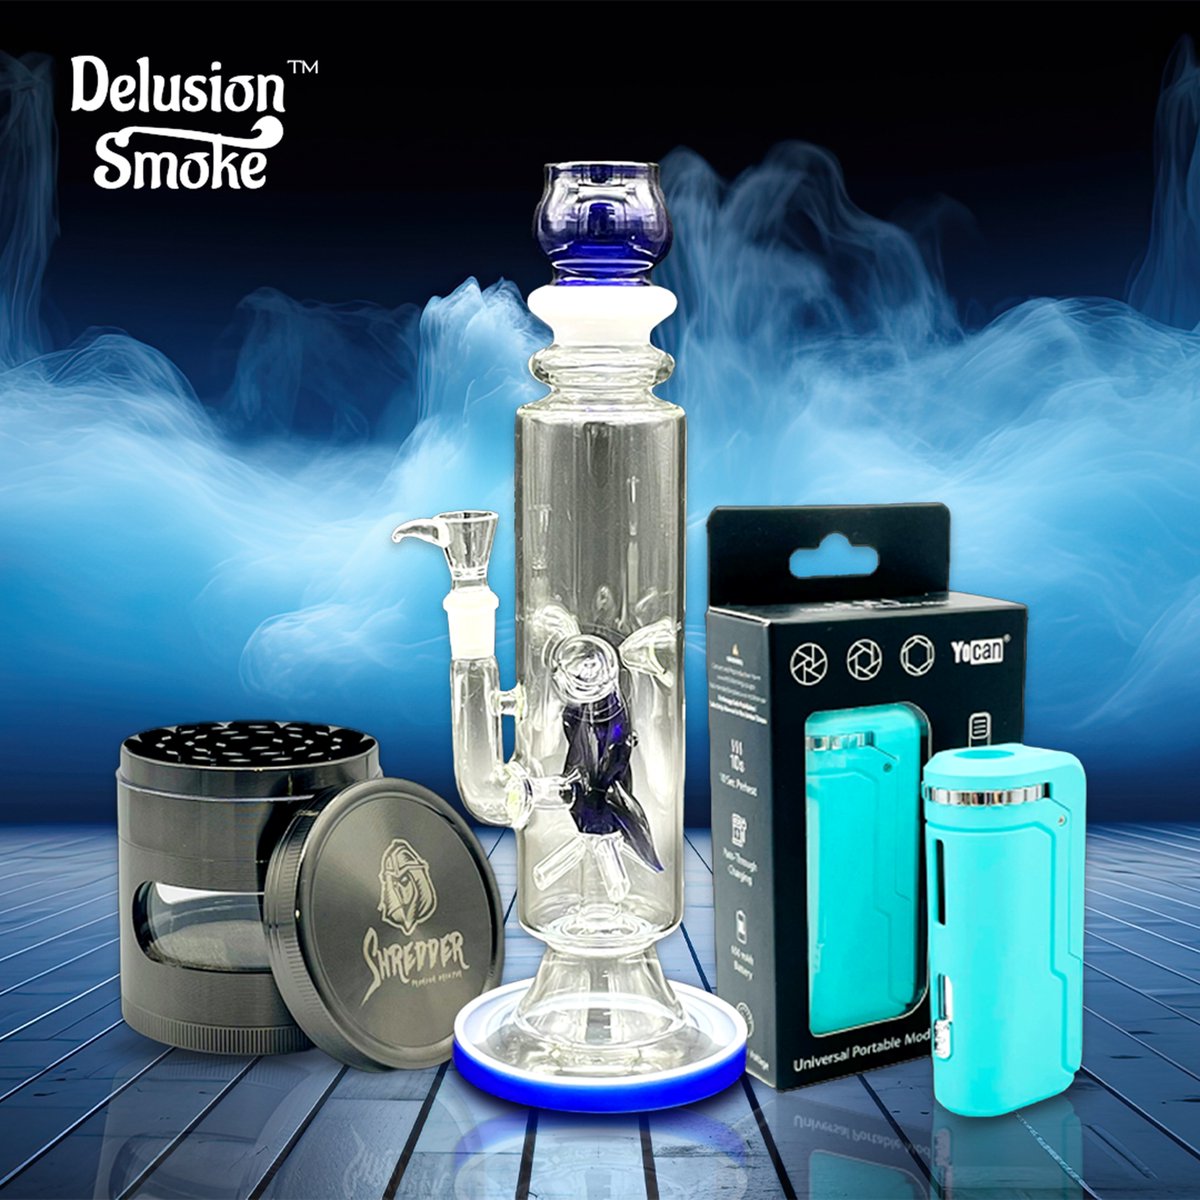 Elevate your smoking experience with our premium accessories! From sleek weed grinders to innovative water pipes and reliable vape batteries, we've got everything you need for the perfect session. Enhance your enjoyment and convenience today. 🔥🌿

#delusionsmoke #weedgrinder